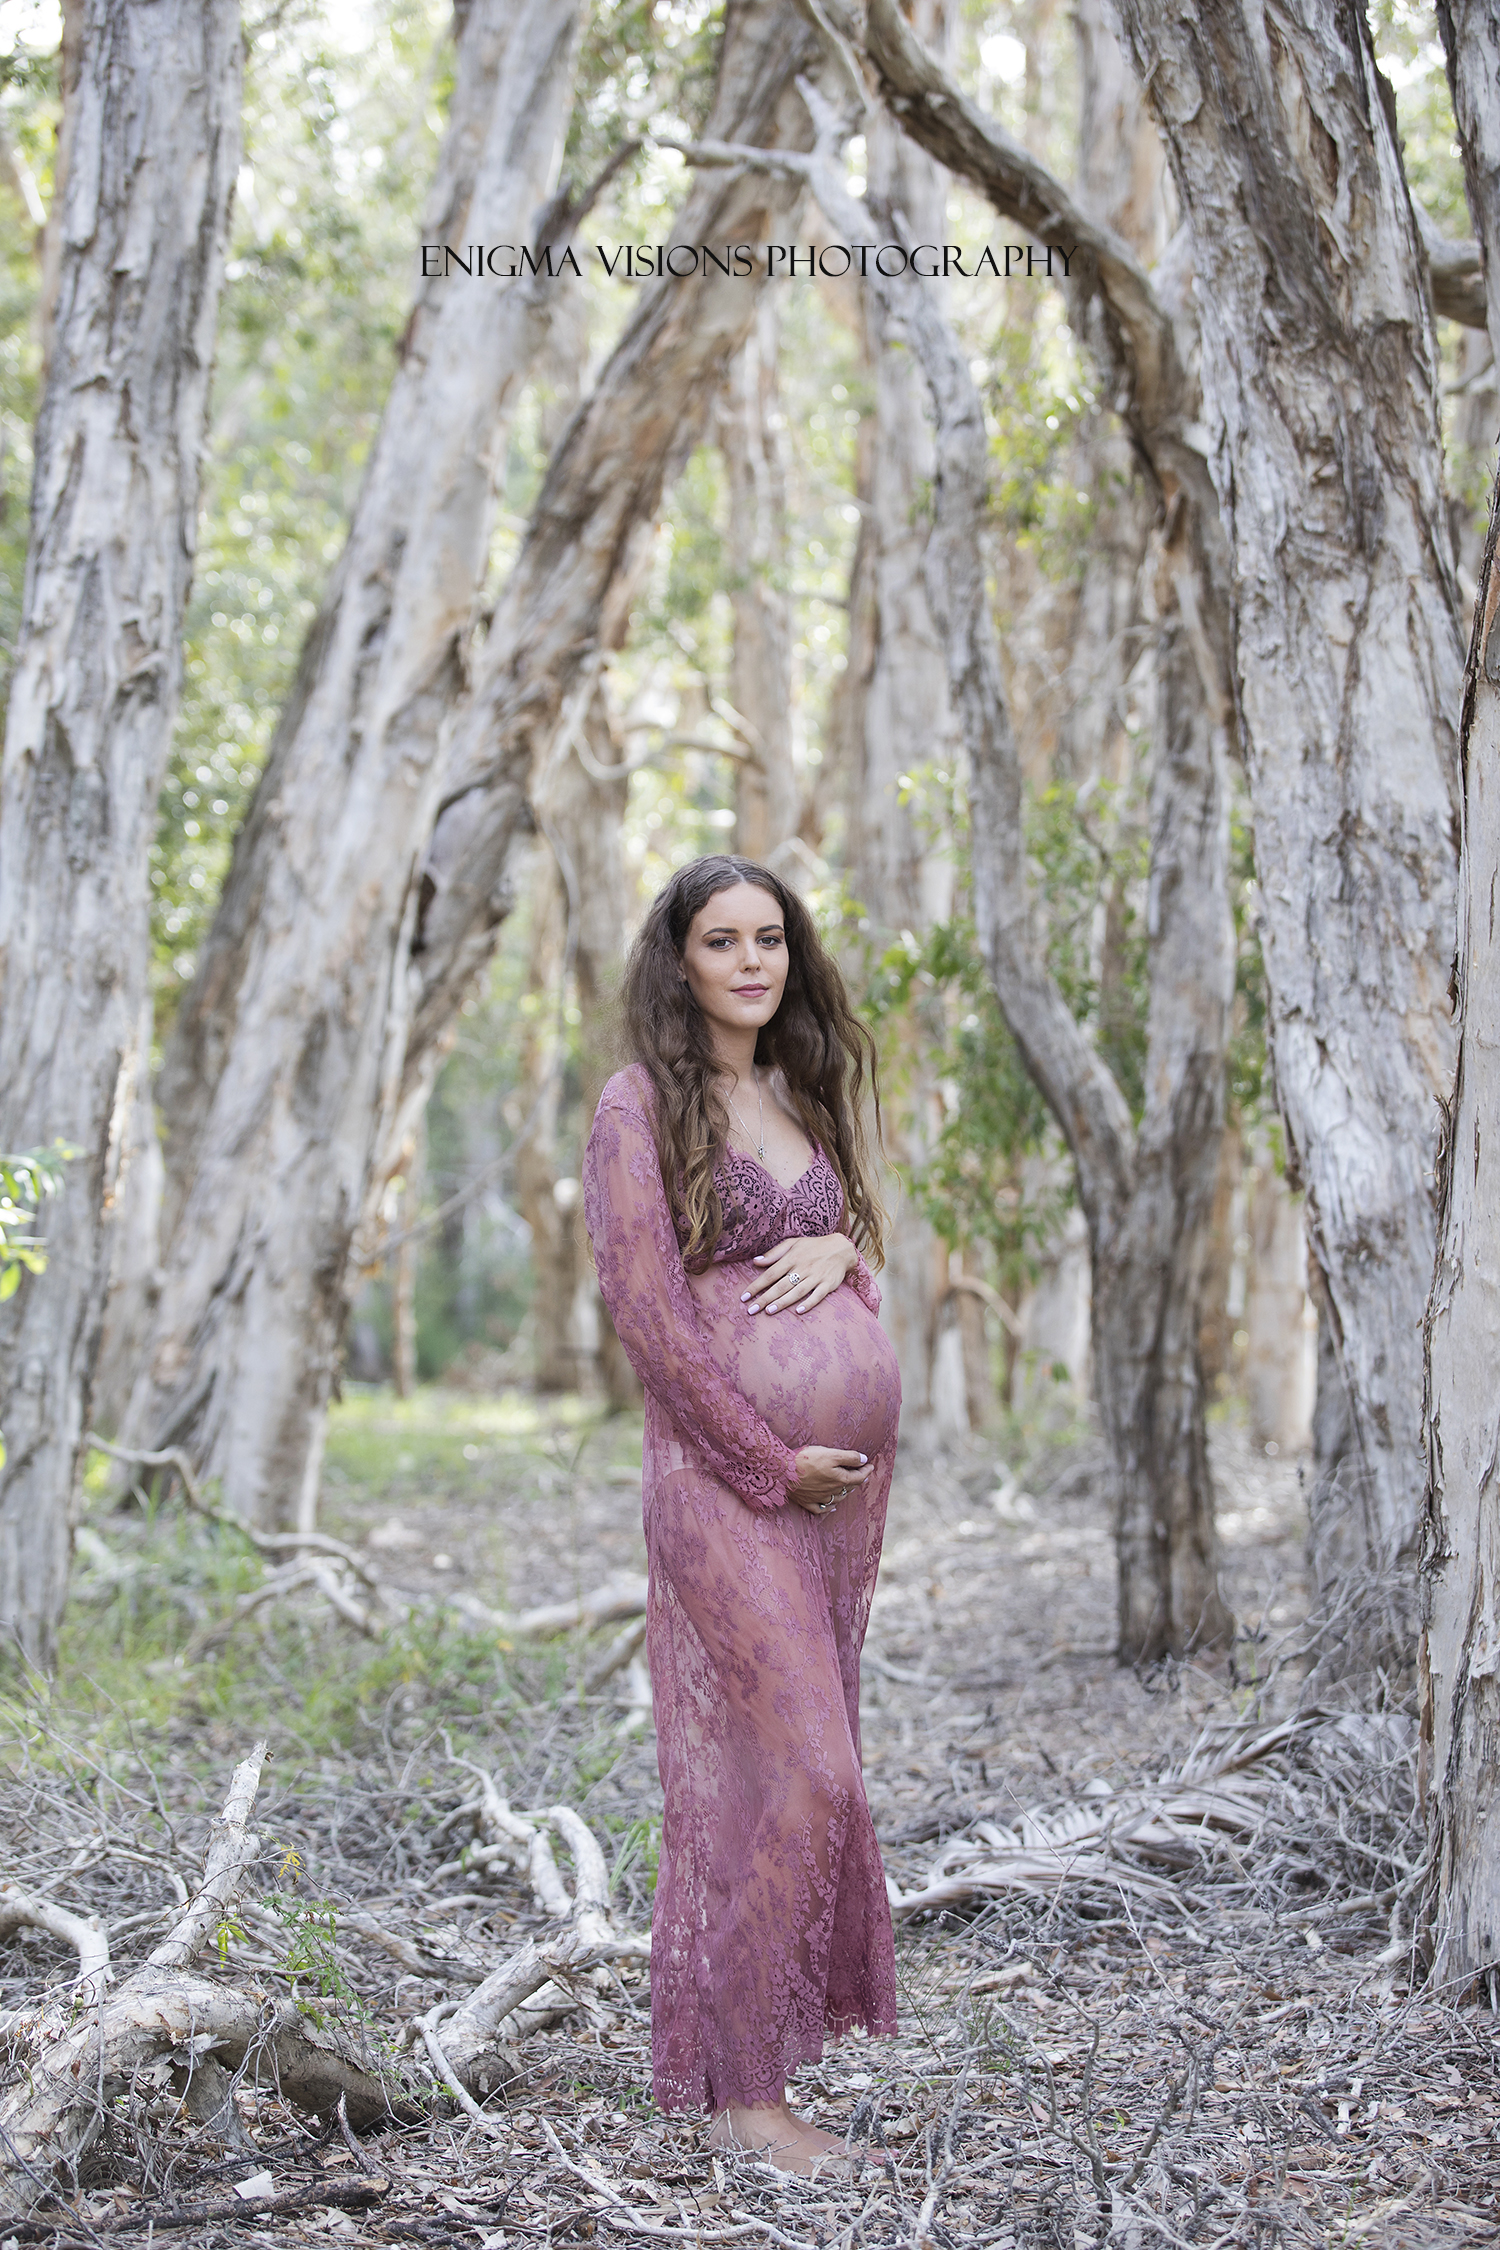 Enigma_Visions_Photography_Maternity_Mahlea015.jpg